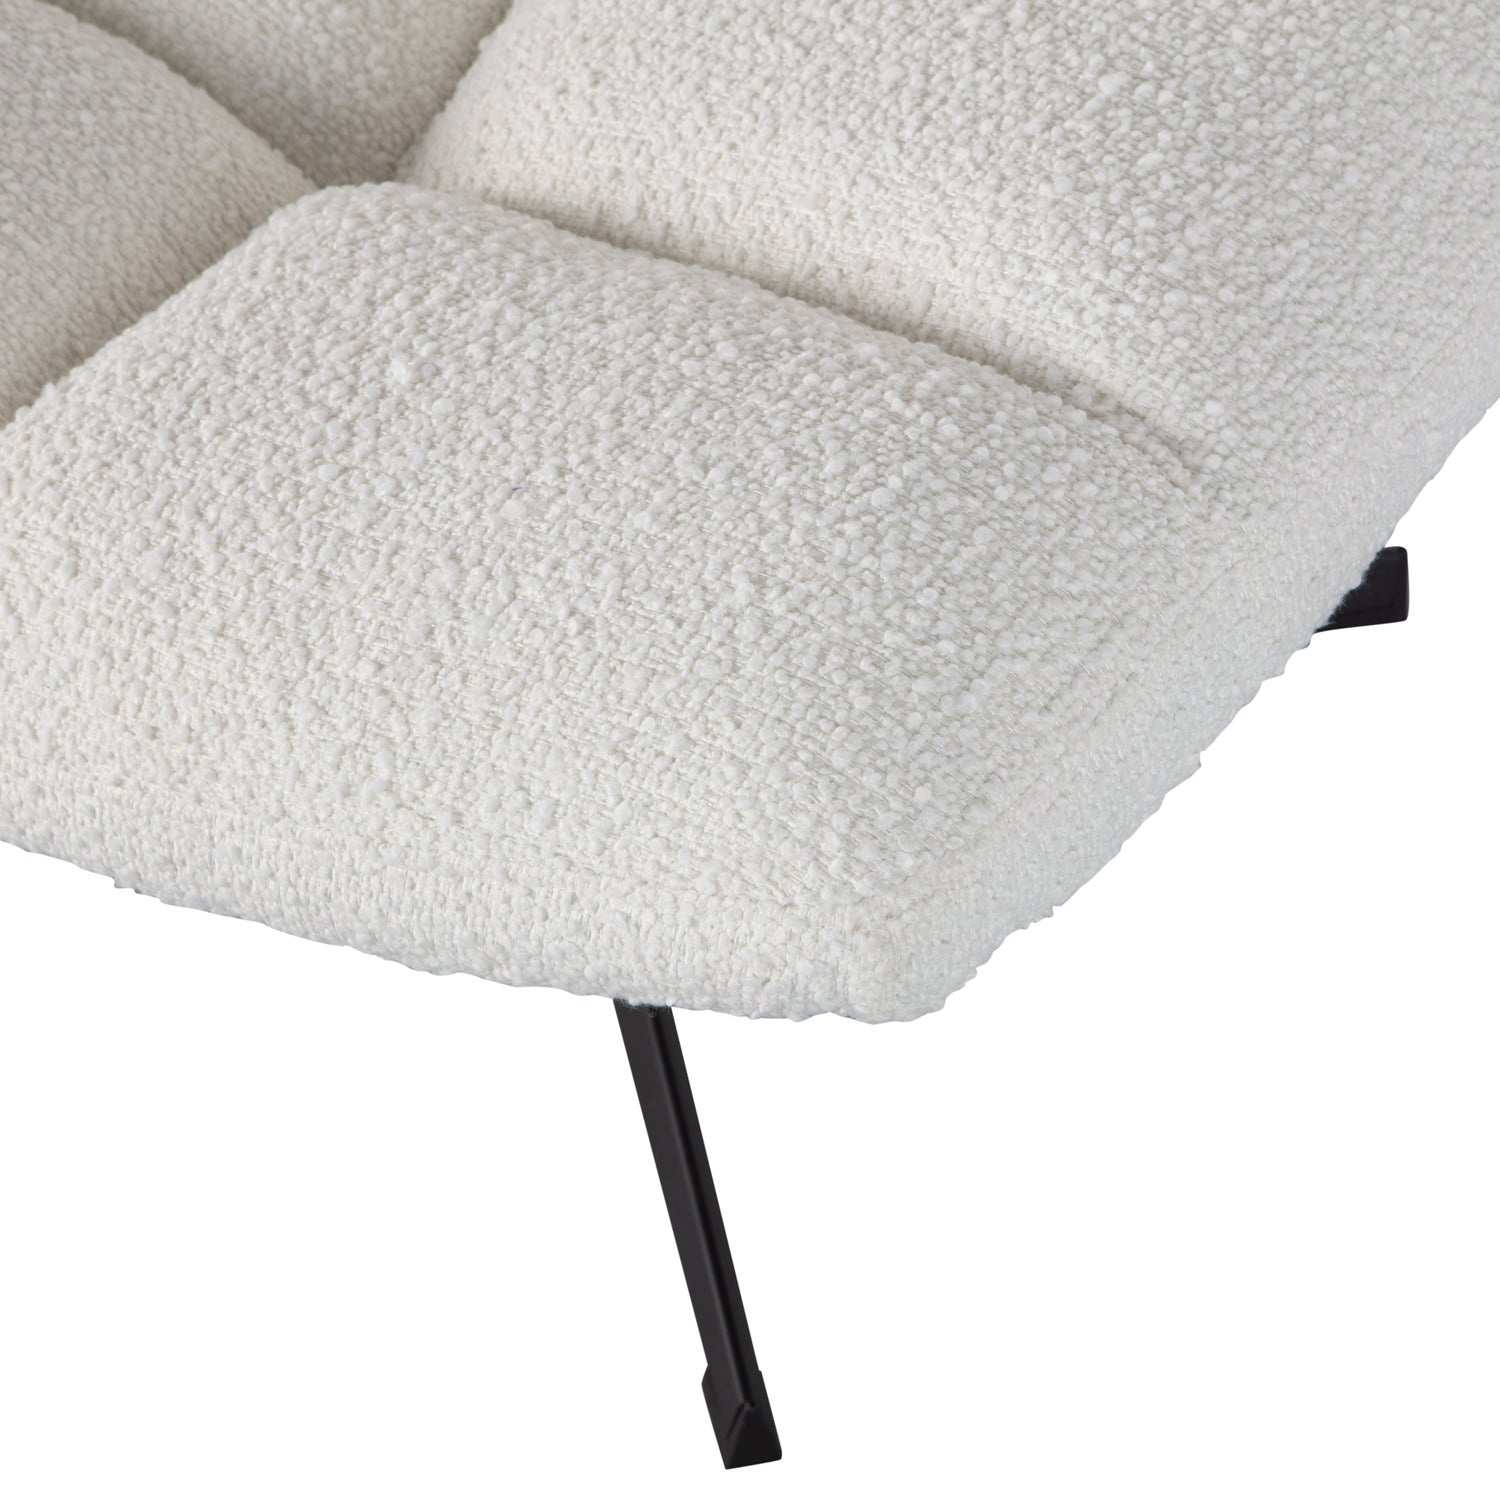 377118-O-01_VS_Vinny_draaifauteuil_boucle_off_white_detail.jpg?auto=webp&format=png&width=1500&height=1500